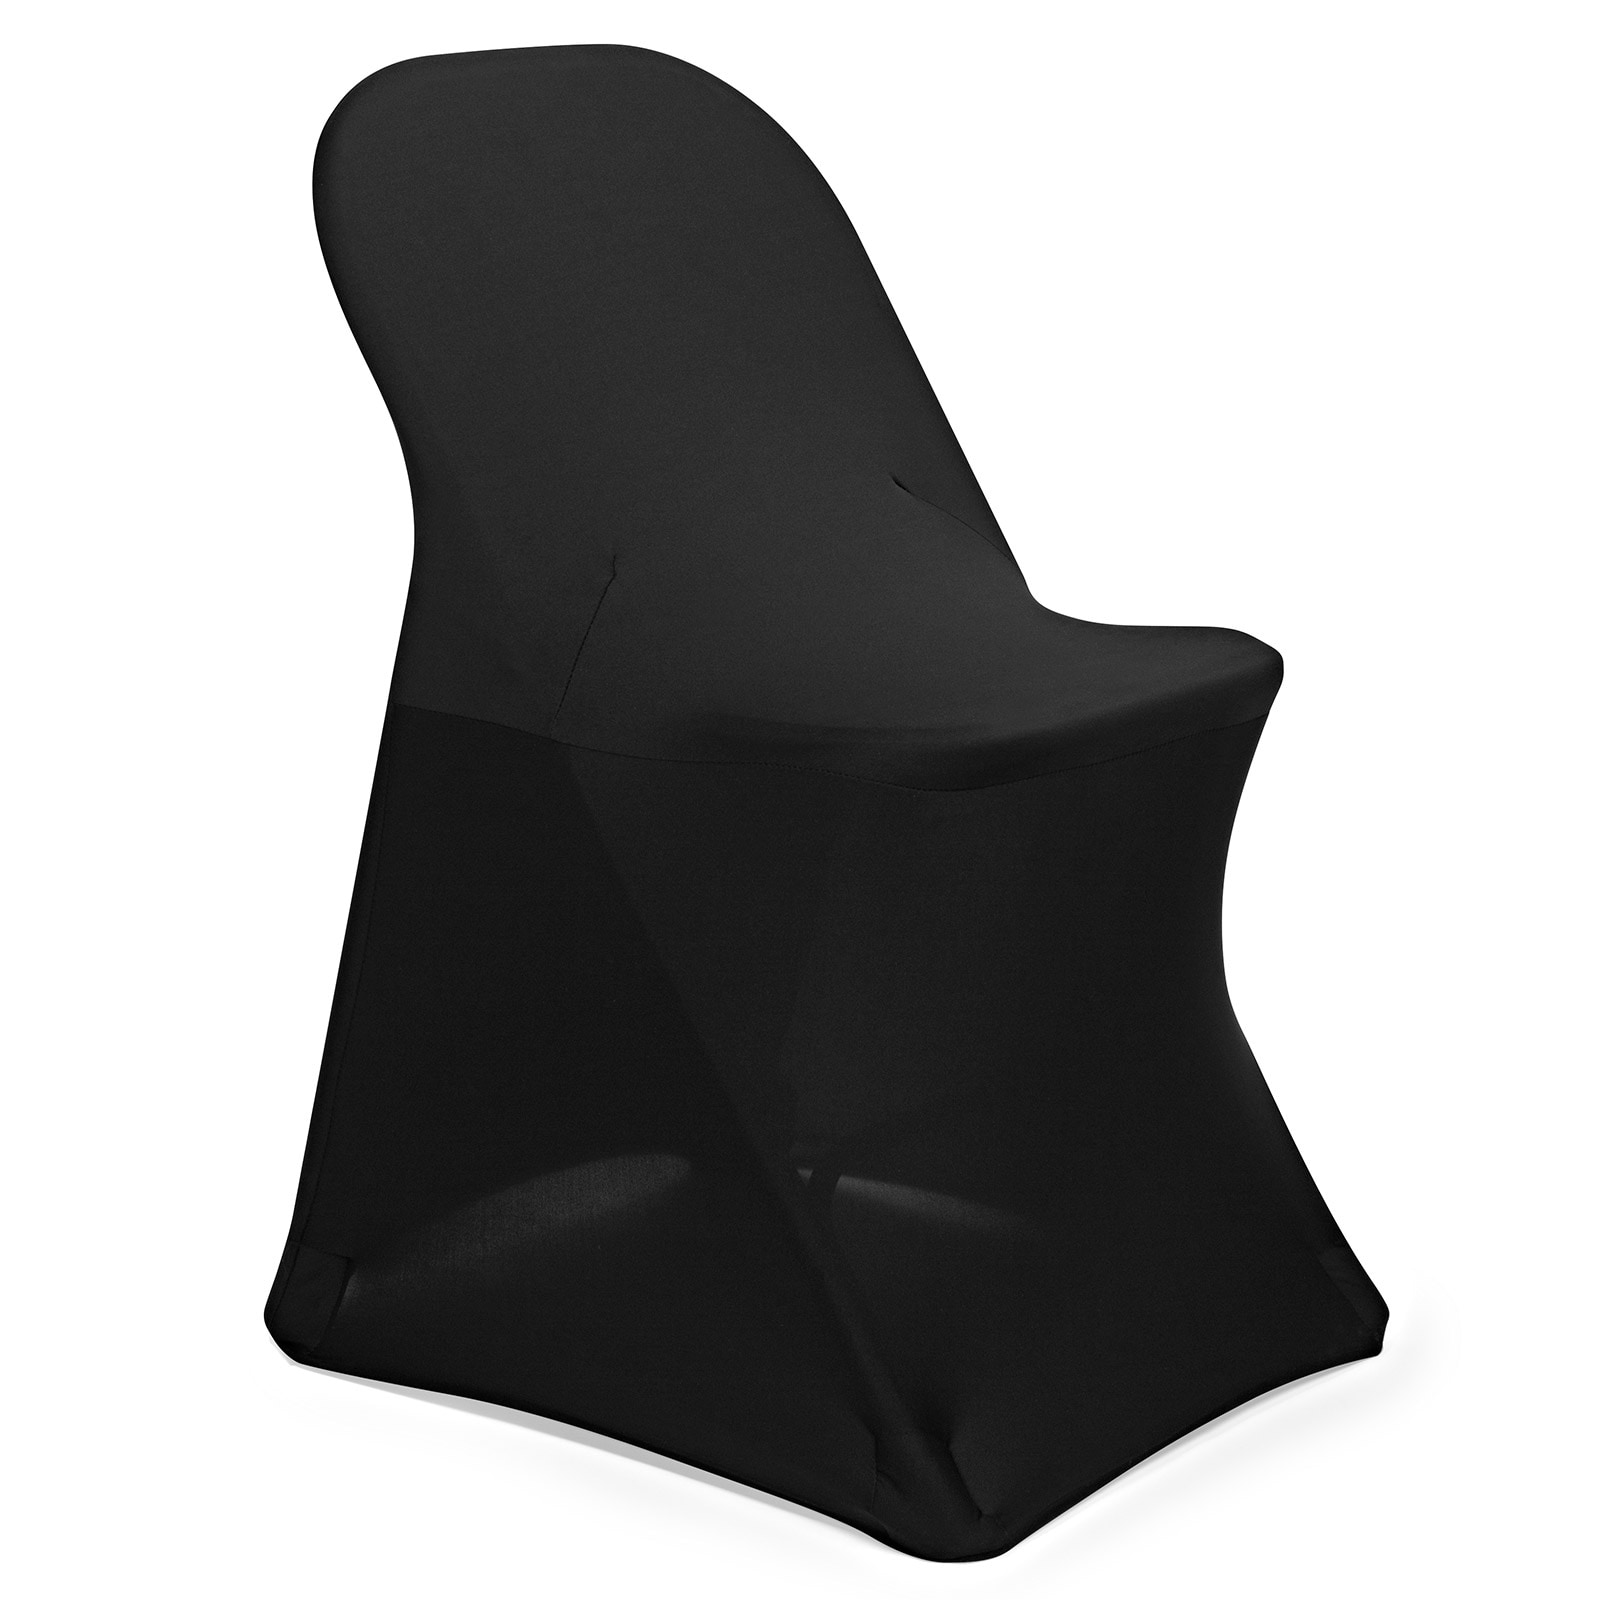 50-Count Spandex Folding Chair Covers - Black - Bed Bath & Beyond - 31074782